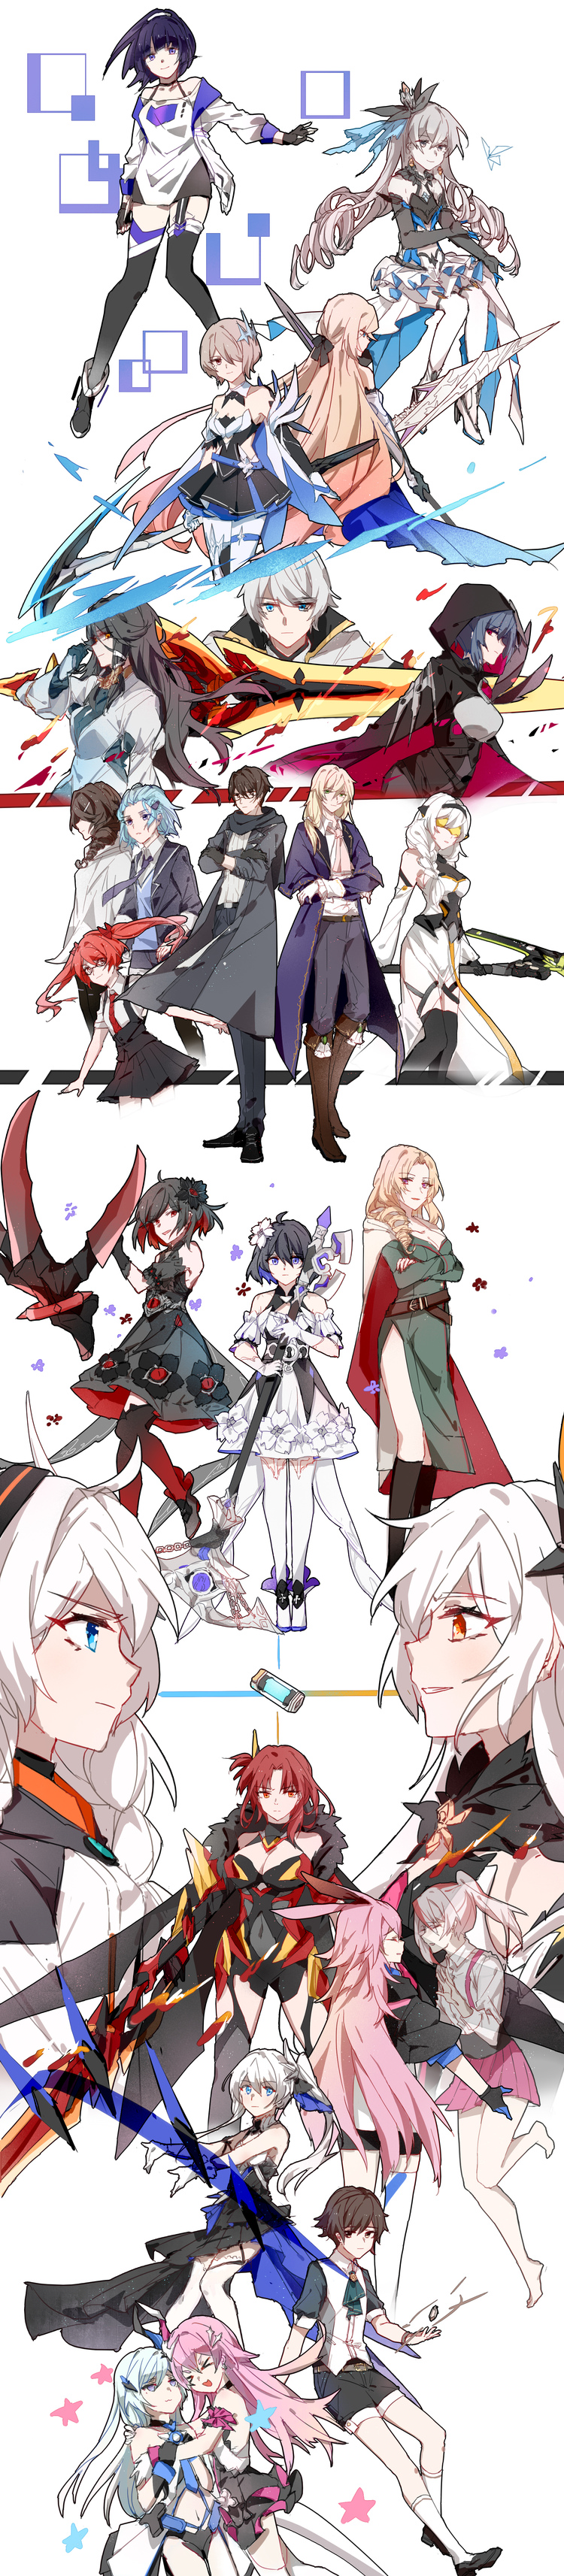 4boys 6+girls :d absurdres animal_ears antenna_hair armor armored_dress bangs bare_shoulders bianka_durandal_ataegina bianka_durandal_ataegina_(bright_knight:_excelsis) black_coat black_dress black_gloves black_hair black_legwear blindfold blonde_hair blue_butterfly blue_eyes blue_hair breasts bronya_zaychik bronya_zaychik_(herrscher_of_reason) brown_hair bug butterfly character_request claws cleavage closed_mouth coat crossed_arms disembodied_limb dress drill_hair dual_persona elbow_gloves eyebrows_visible_through_hair fingerless_gloves flaming_sword flaming_weapon flower fox_ears frederica_nikola_tesla full_body fur_collar ghost glasses gloves hair_between_eyes hair_flower hair_ornament hair_over_one_eye hairpin headband highres holding holding_lance holding_polearm holding_sword holding_weapon honkai_(series) honkai_impact_3rd hug jackal_(honkai_impact) jacket kevin_kaslana kiana_kaslana kiana_kaslana_(herrscher_of_the_void) kiana_kaslana_(white_comet) kllia lance lieserl_albert_einstein liliya_olenyeva long_hair long_image looking_at_viewer mole mole_on_breast multiple_boys multiple_girls murata_himeko murata_himeko_(vermillion_knight) necktie open_mouth otto_apocalypse pink_hair polearm ponytail purple_coat raiden_mei raiden_mei_(striker_fulminata) raven_(honkai_impact_3rd) red_eyes red_hair red_neckwear rita_rossweisse rita_rossweisse_(phantom_iron) rozaliya_olenyeva scythe seele_(alter_ego) seele_vollerei seele_vollerei_(stygian_nymph) short_hair short_sleeves siblings side_ponytail simple_background single_thighhigh sleeveless sleeveless_dress smile standing sword tall_image theresa_apocalypse theresa_apocalypse_(twilight_paladin) thighhighs twin_drills twins twintails wavy_hair weapon welt_yang white_background white_blindfold white_dress white_gloves white_hair white_legwear yae_rin yae_sakura yae_sakura_(goushinnso_memento) yellow_eyes